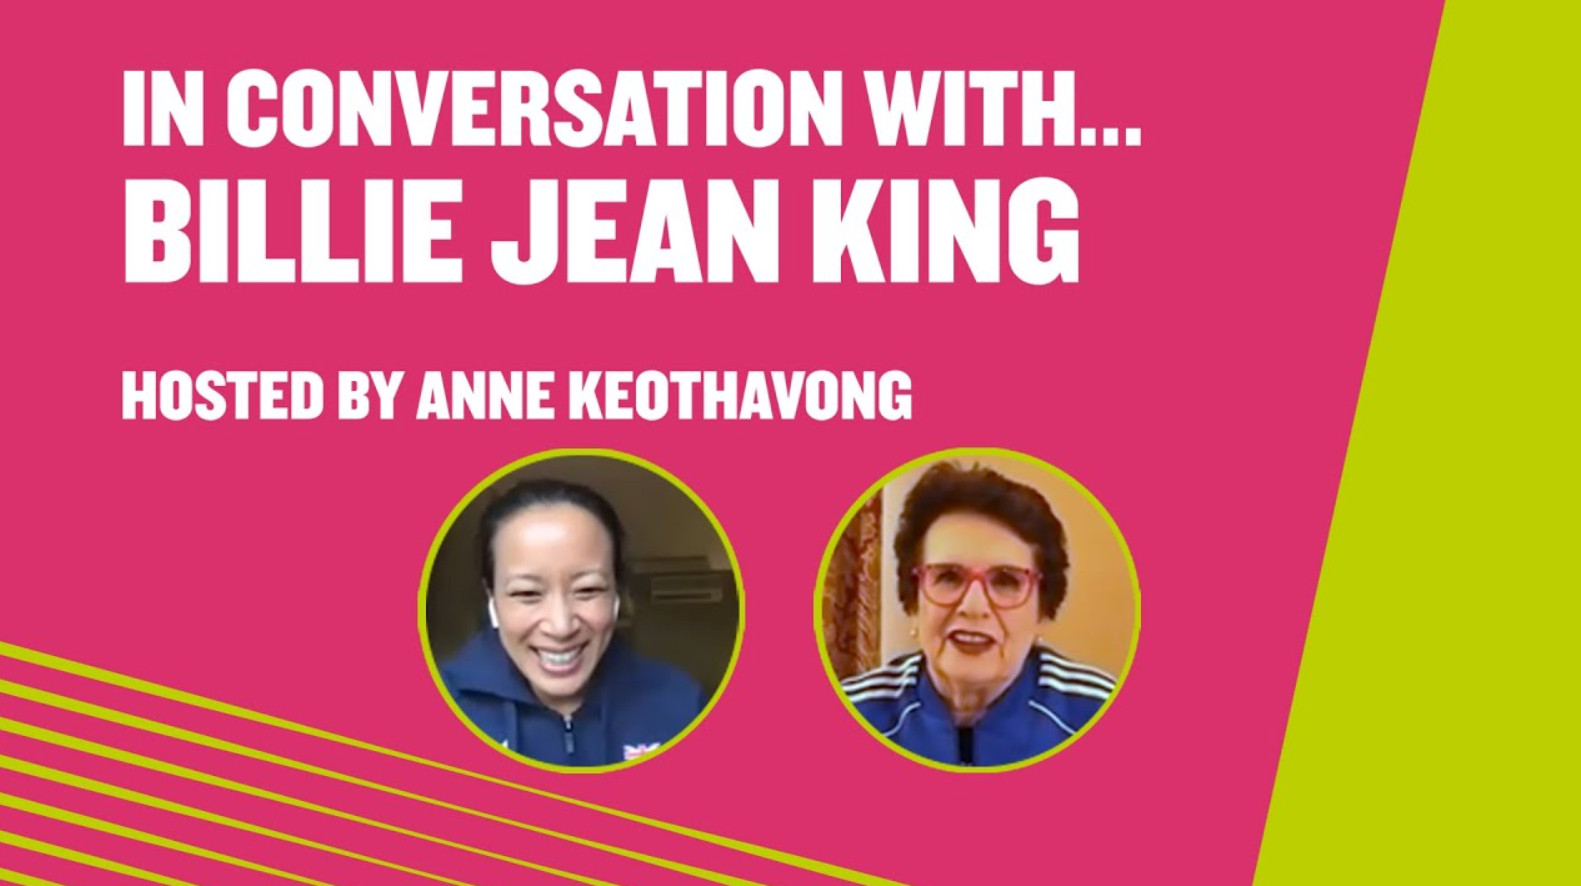 In conversation with the legend billie jean king